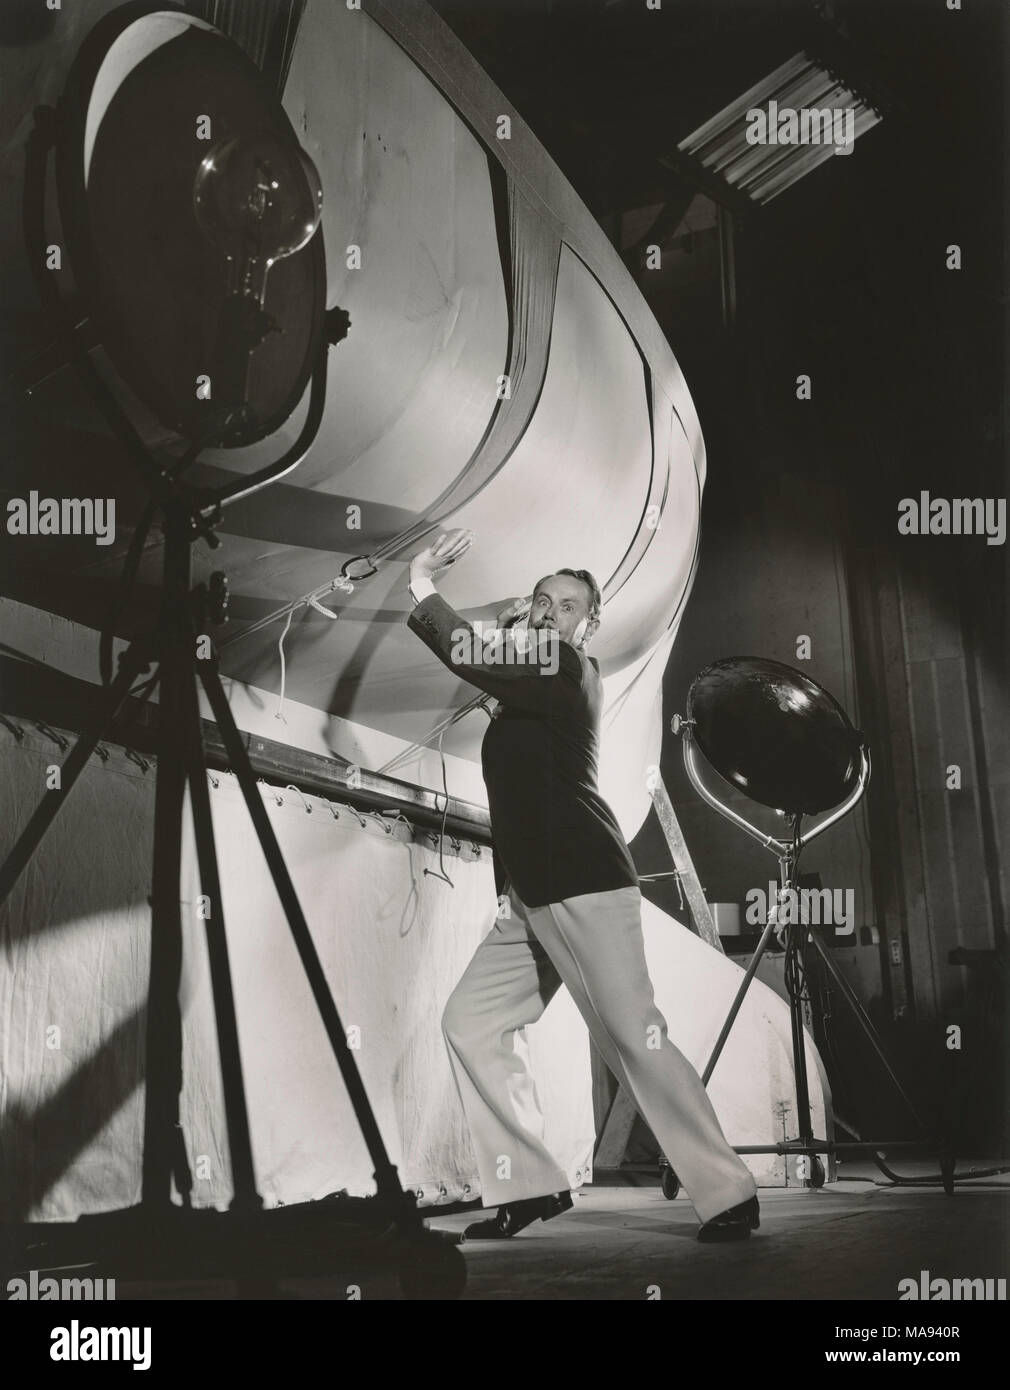 Charles Ruggles, Full-Length Publicity Portrait, On-set Attempting to Support a Stage Prop, Bert Longworth for Paramount Pictures, 1934 Stock Photo